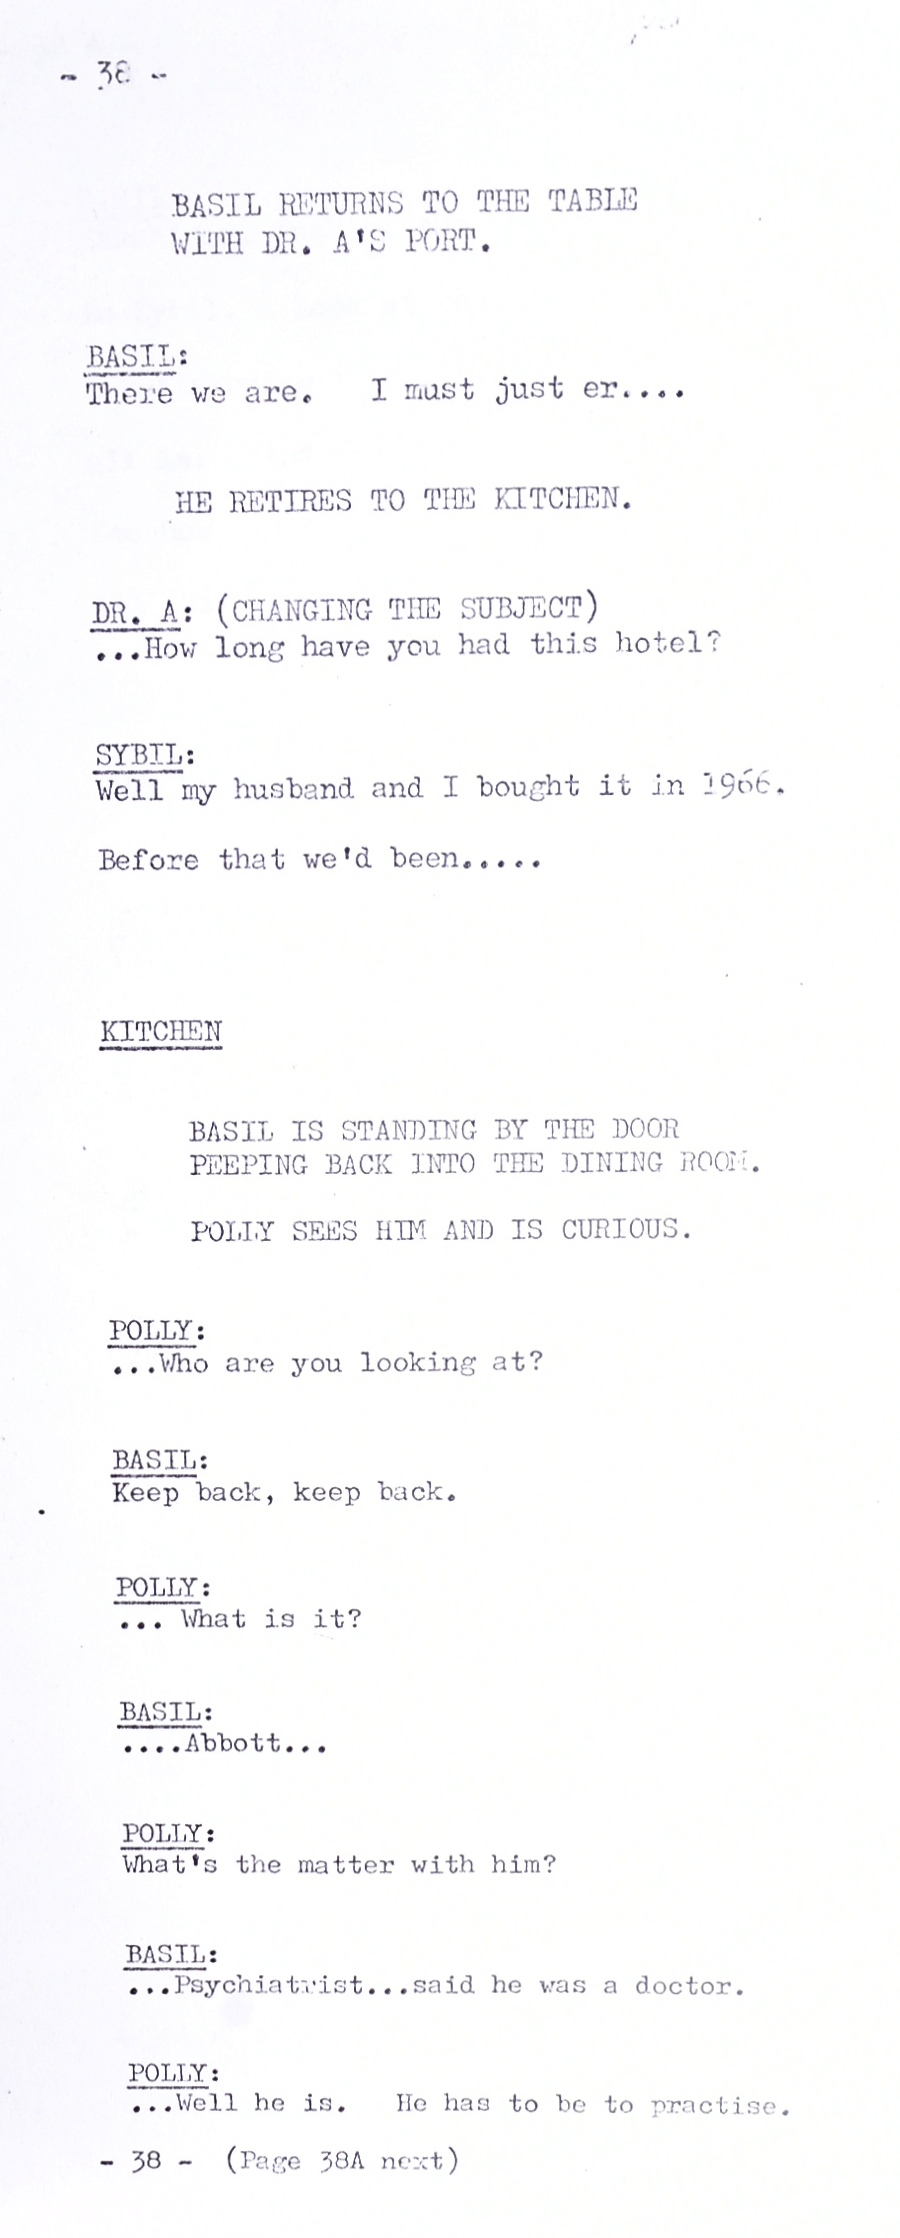 FAWLTY TOWERS (BBC SITCOM) - ORIGINAL PRODUCTION SCRIPT - Image 5 of 5